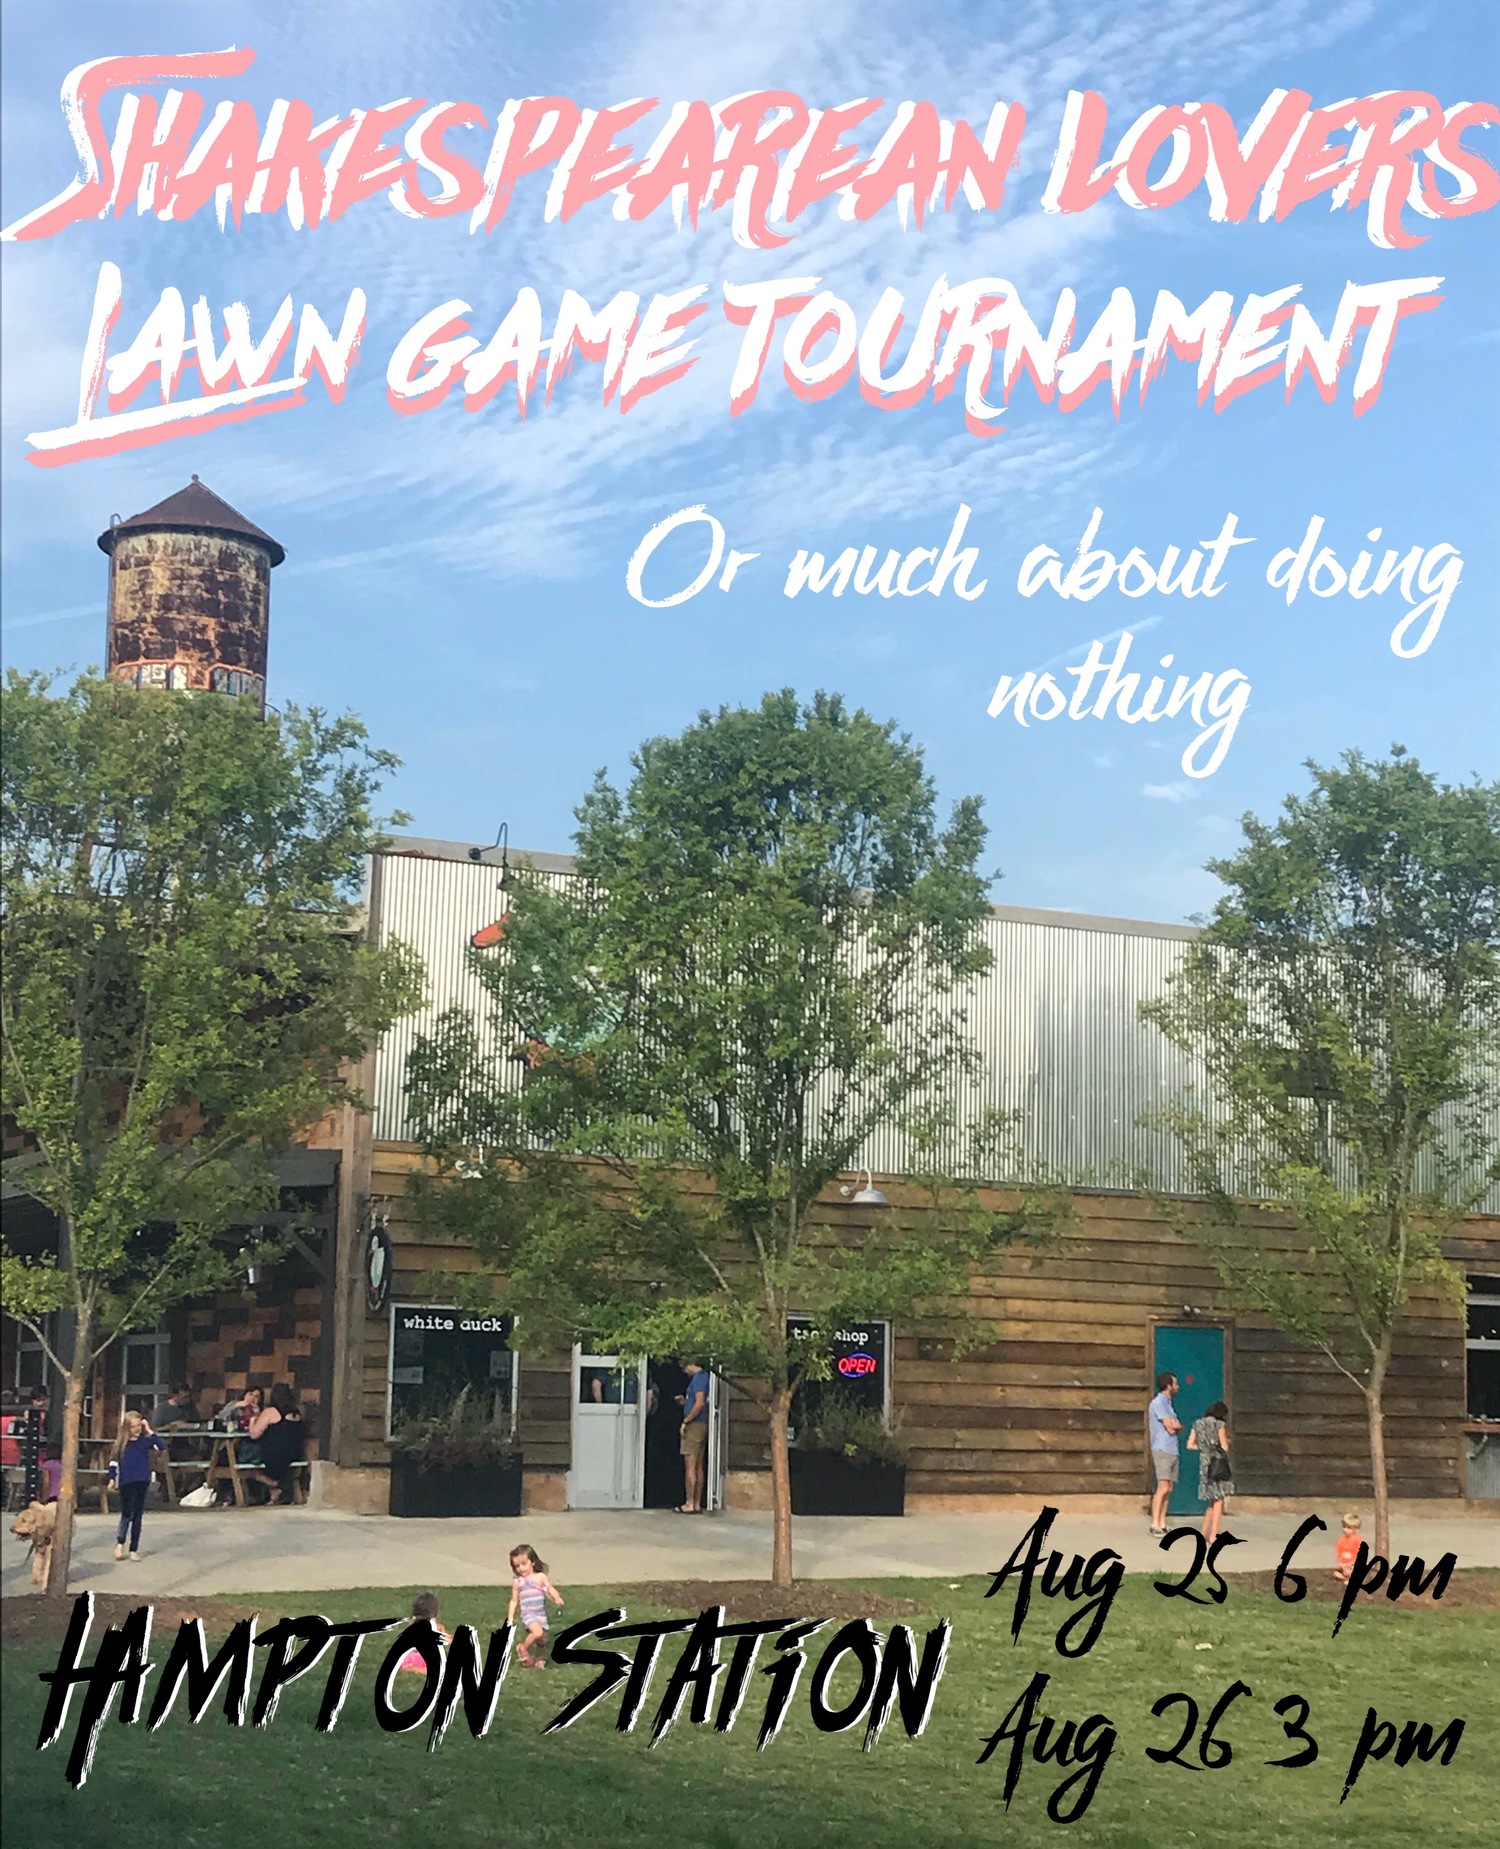 Interview: Lauren French, director of SHAKESPEAREAN LOVERS LAWN GAME 